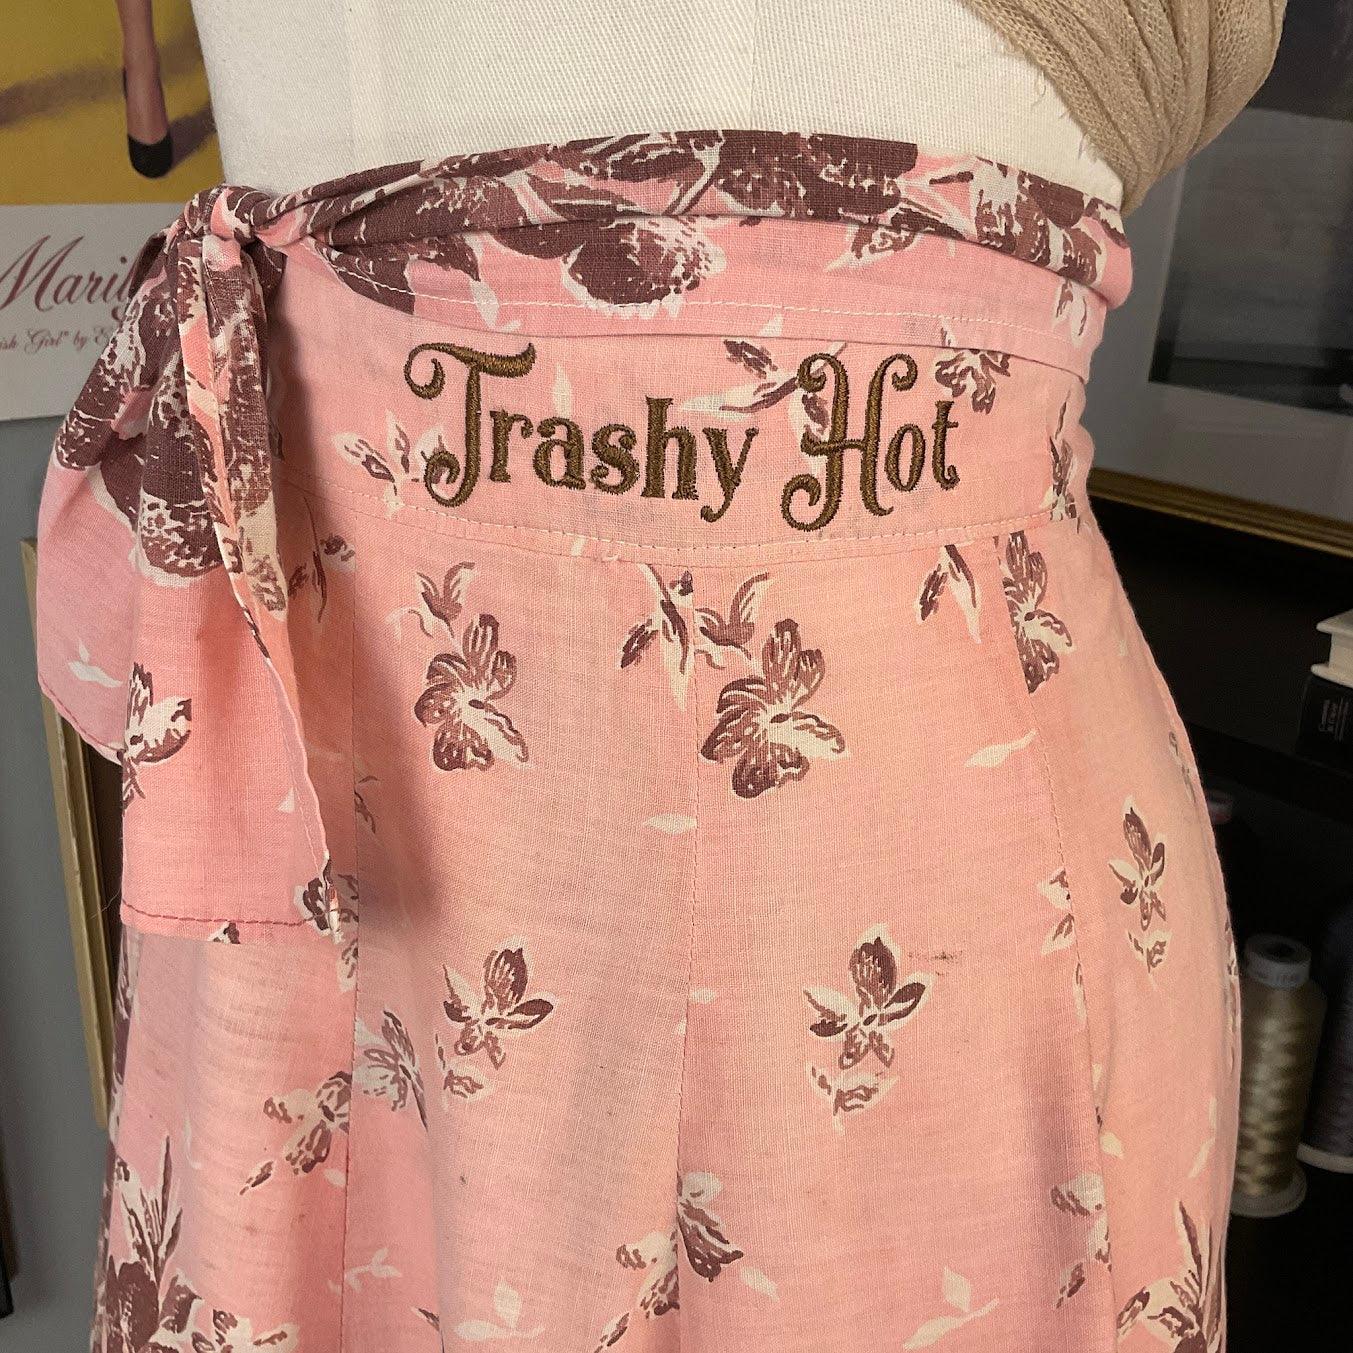 Trashy Hot Apron - Offensively Domestic